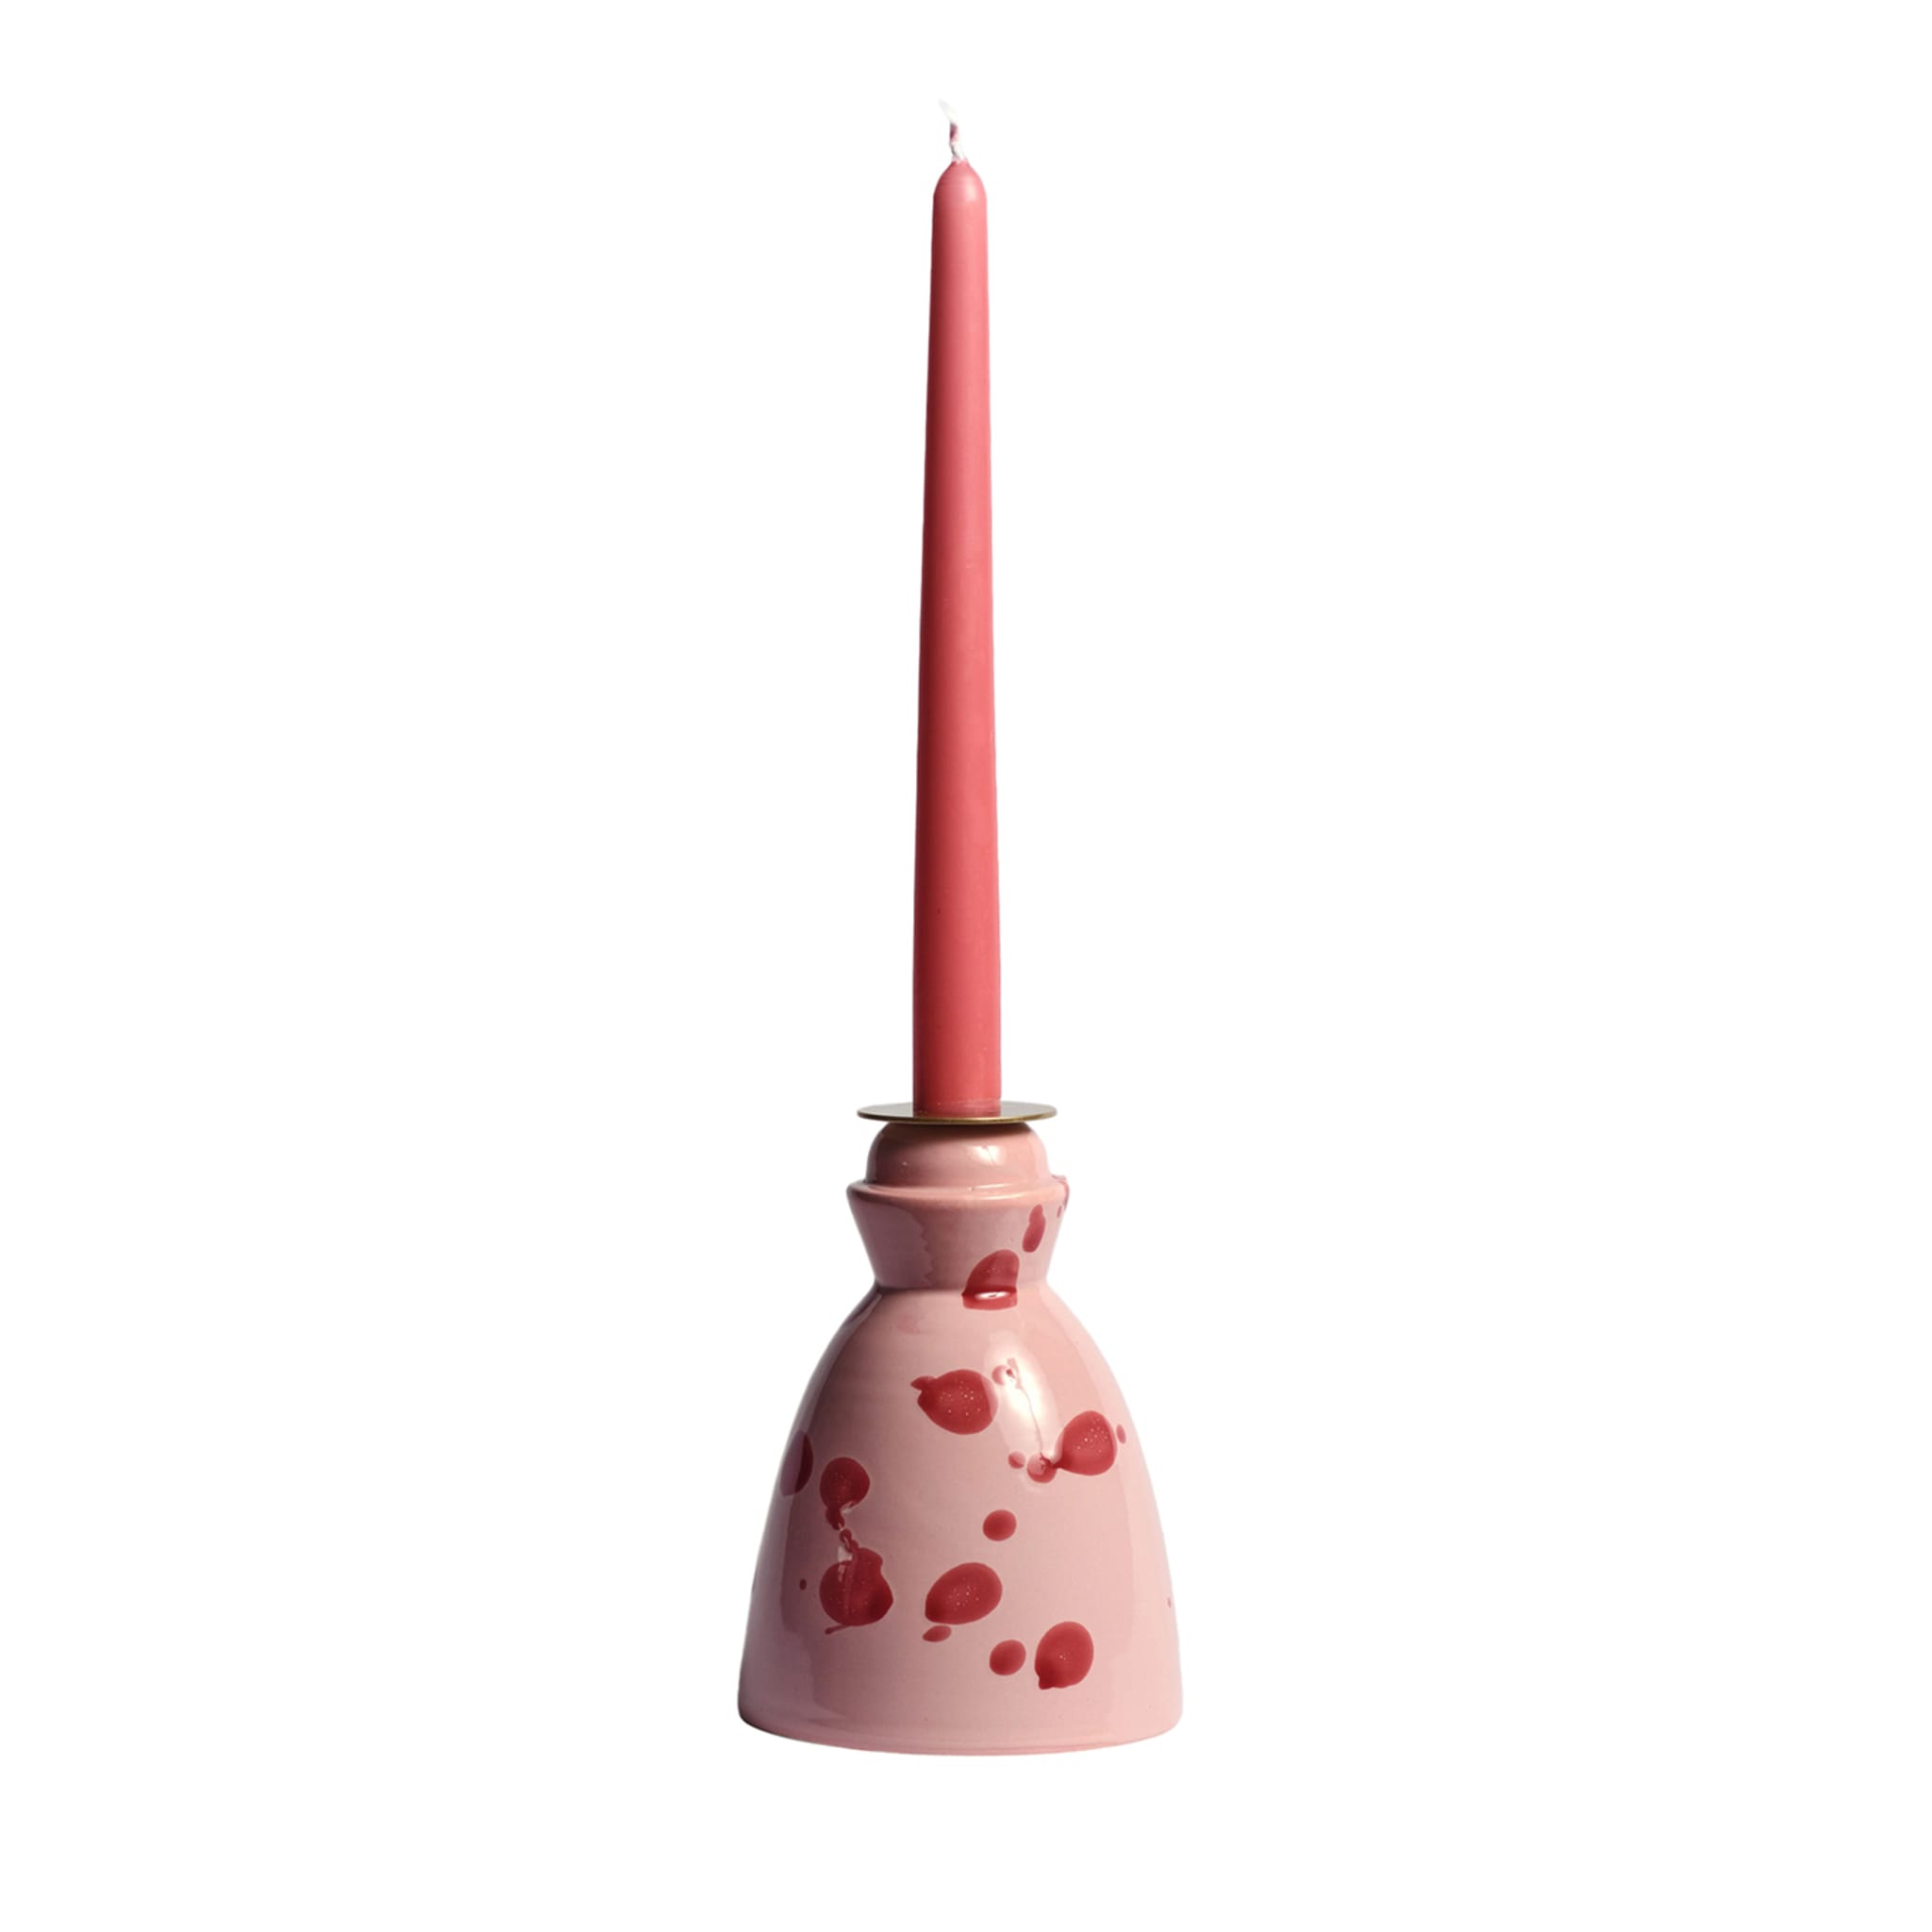 Rose Ceramic Candlestick with 4 Beeswax Candles - Main view